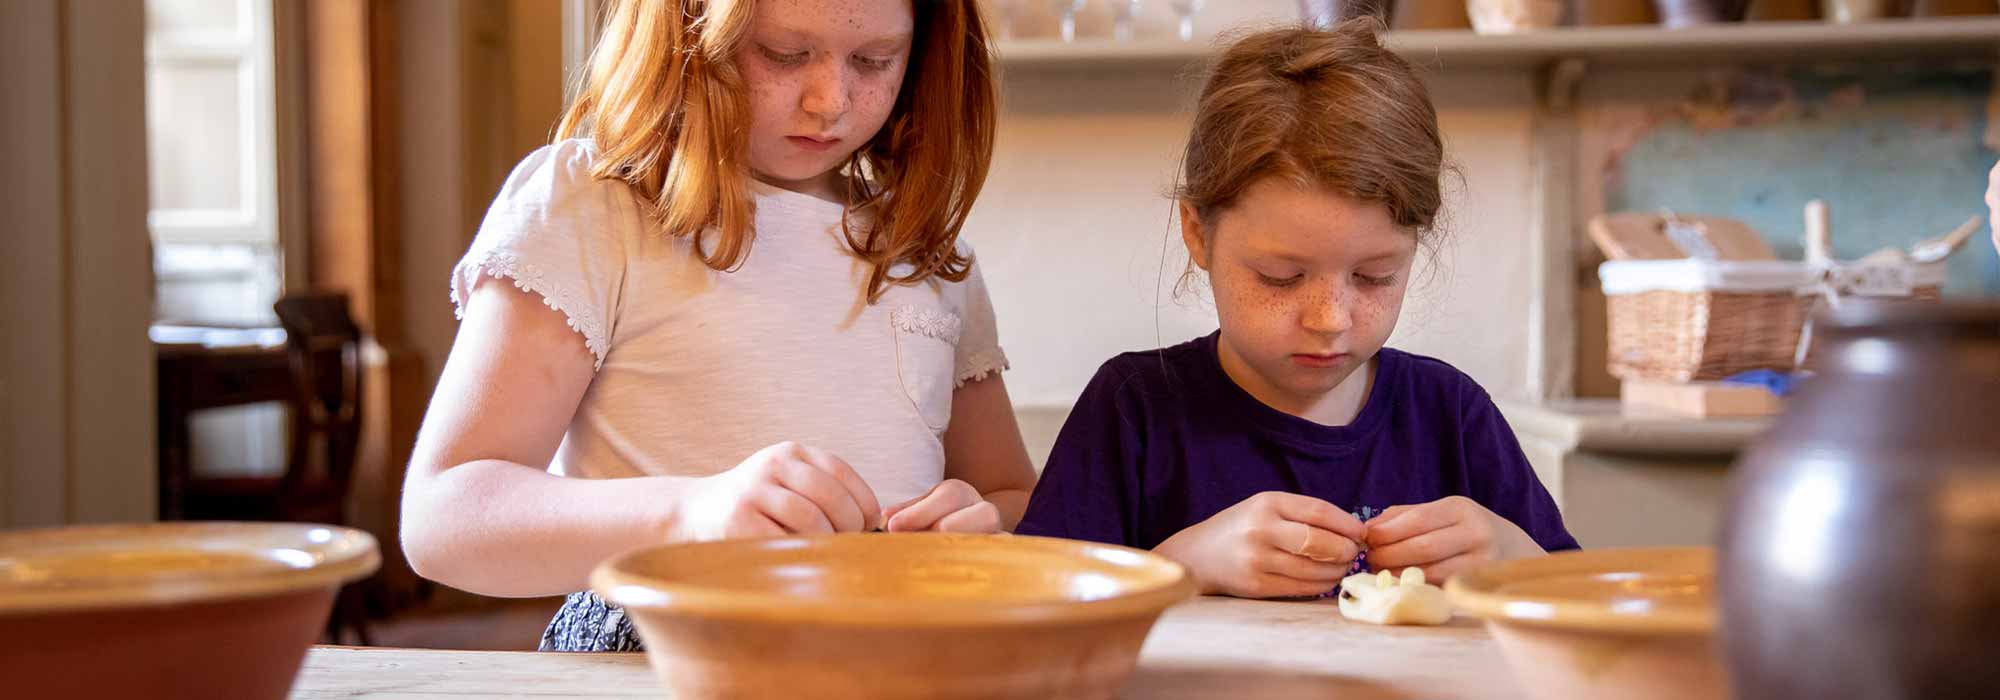 Two children are depicted learning how to cook